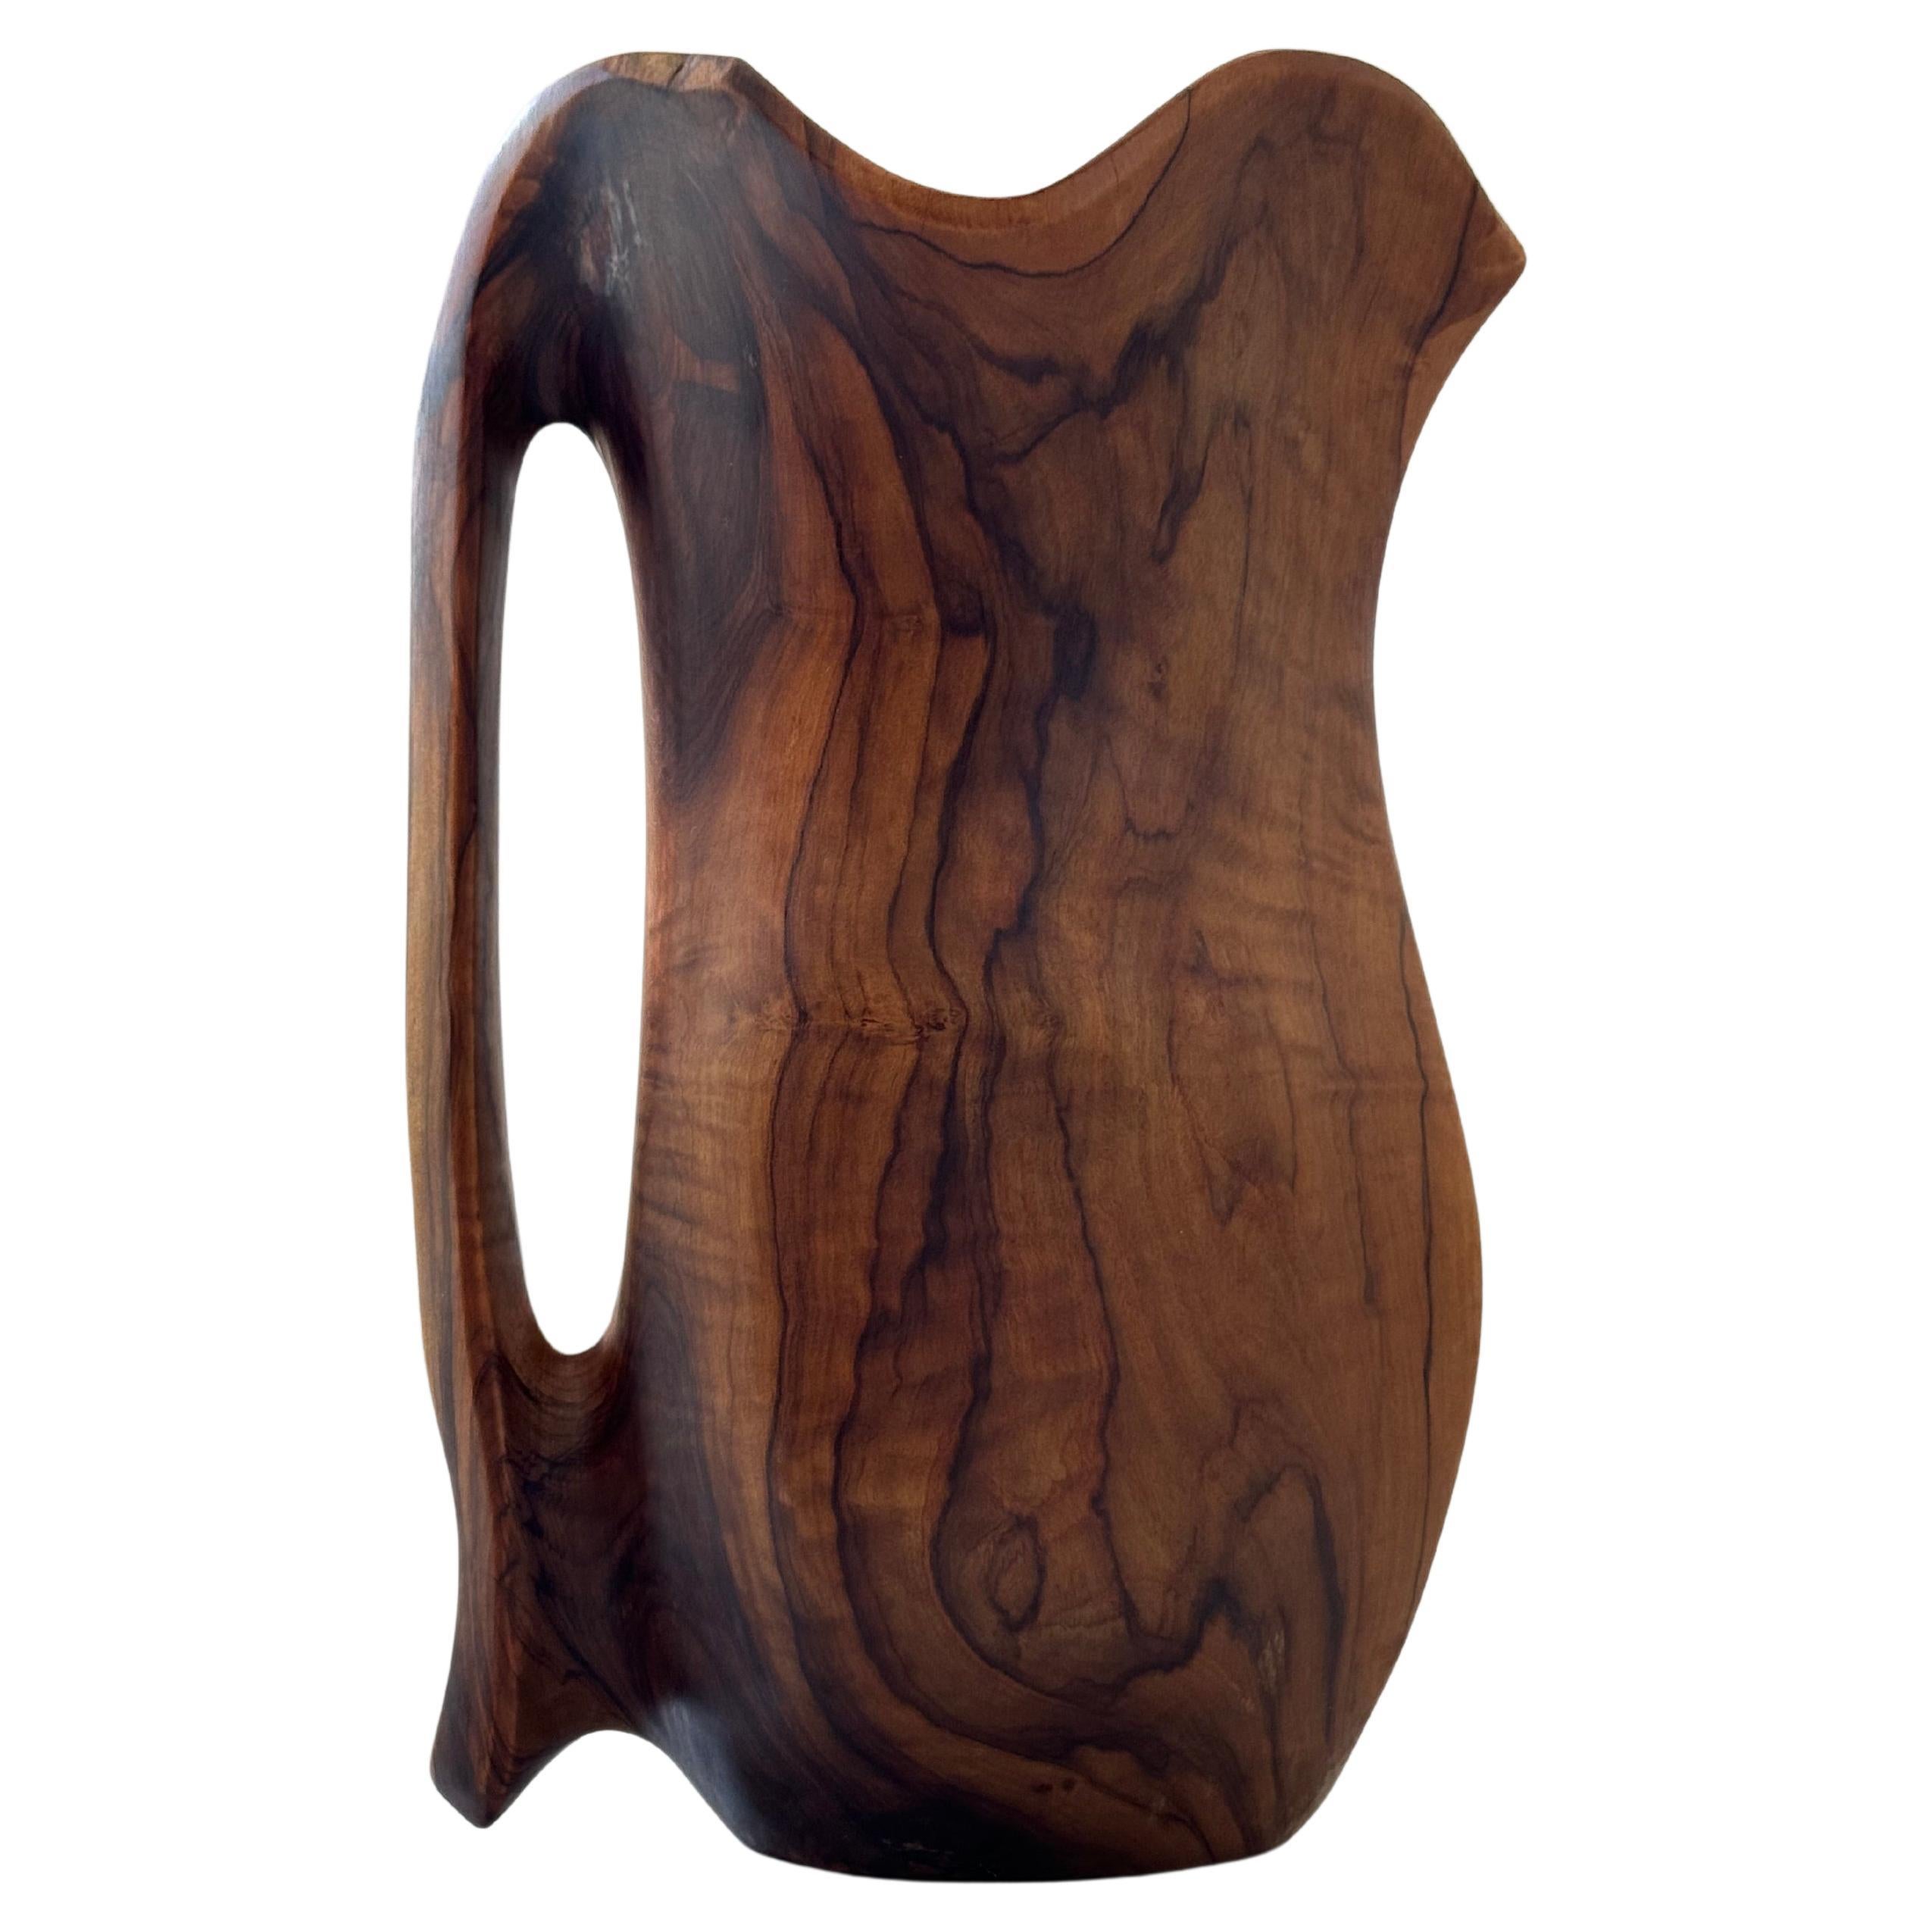 Monoxyl pitcher olive wood,  French folk art, Alexandre Noll style, circa 1950s For Sale